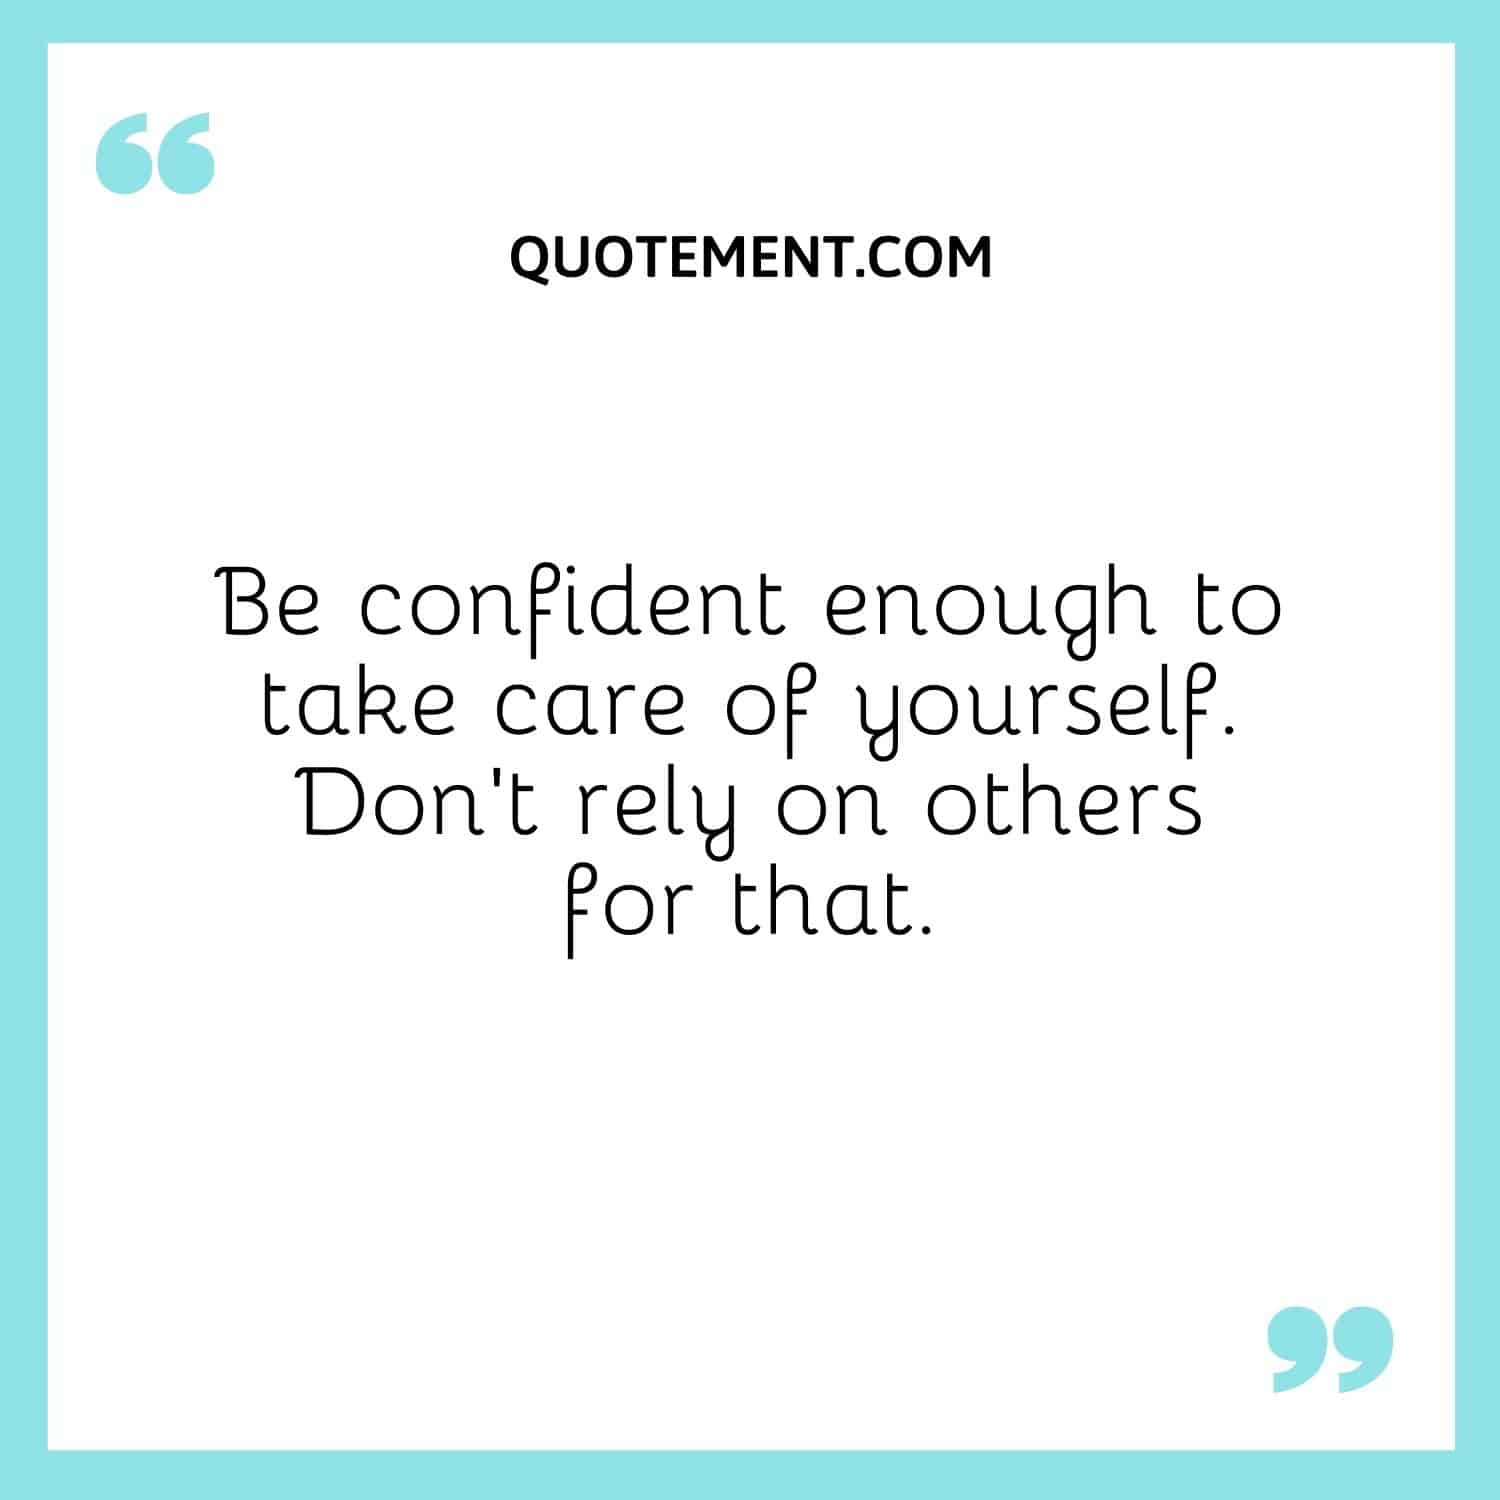 Be confident enough to take care of yourself